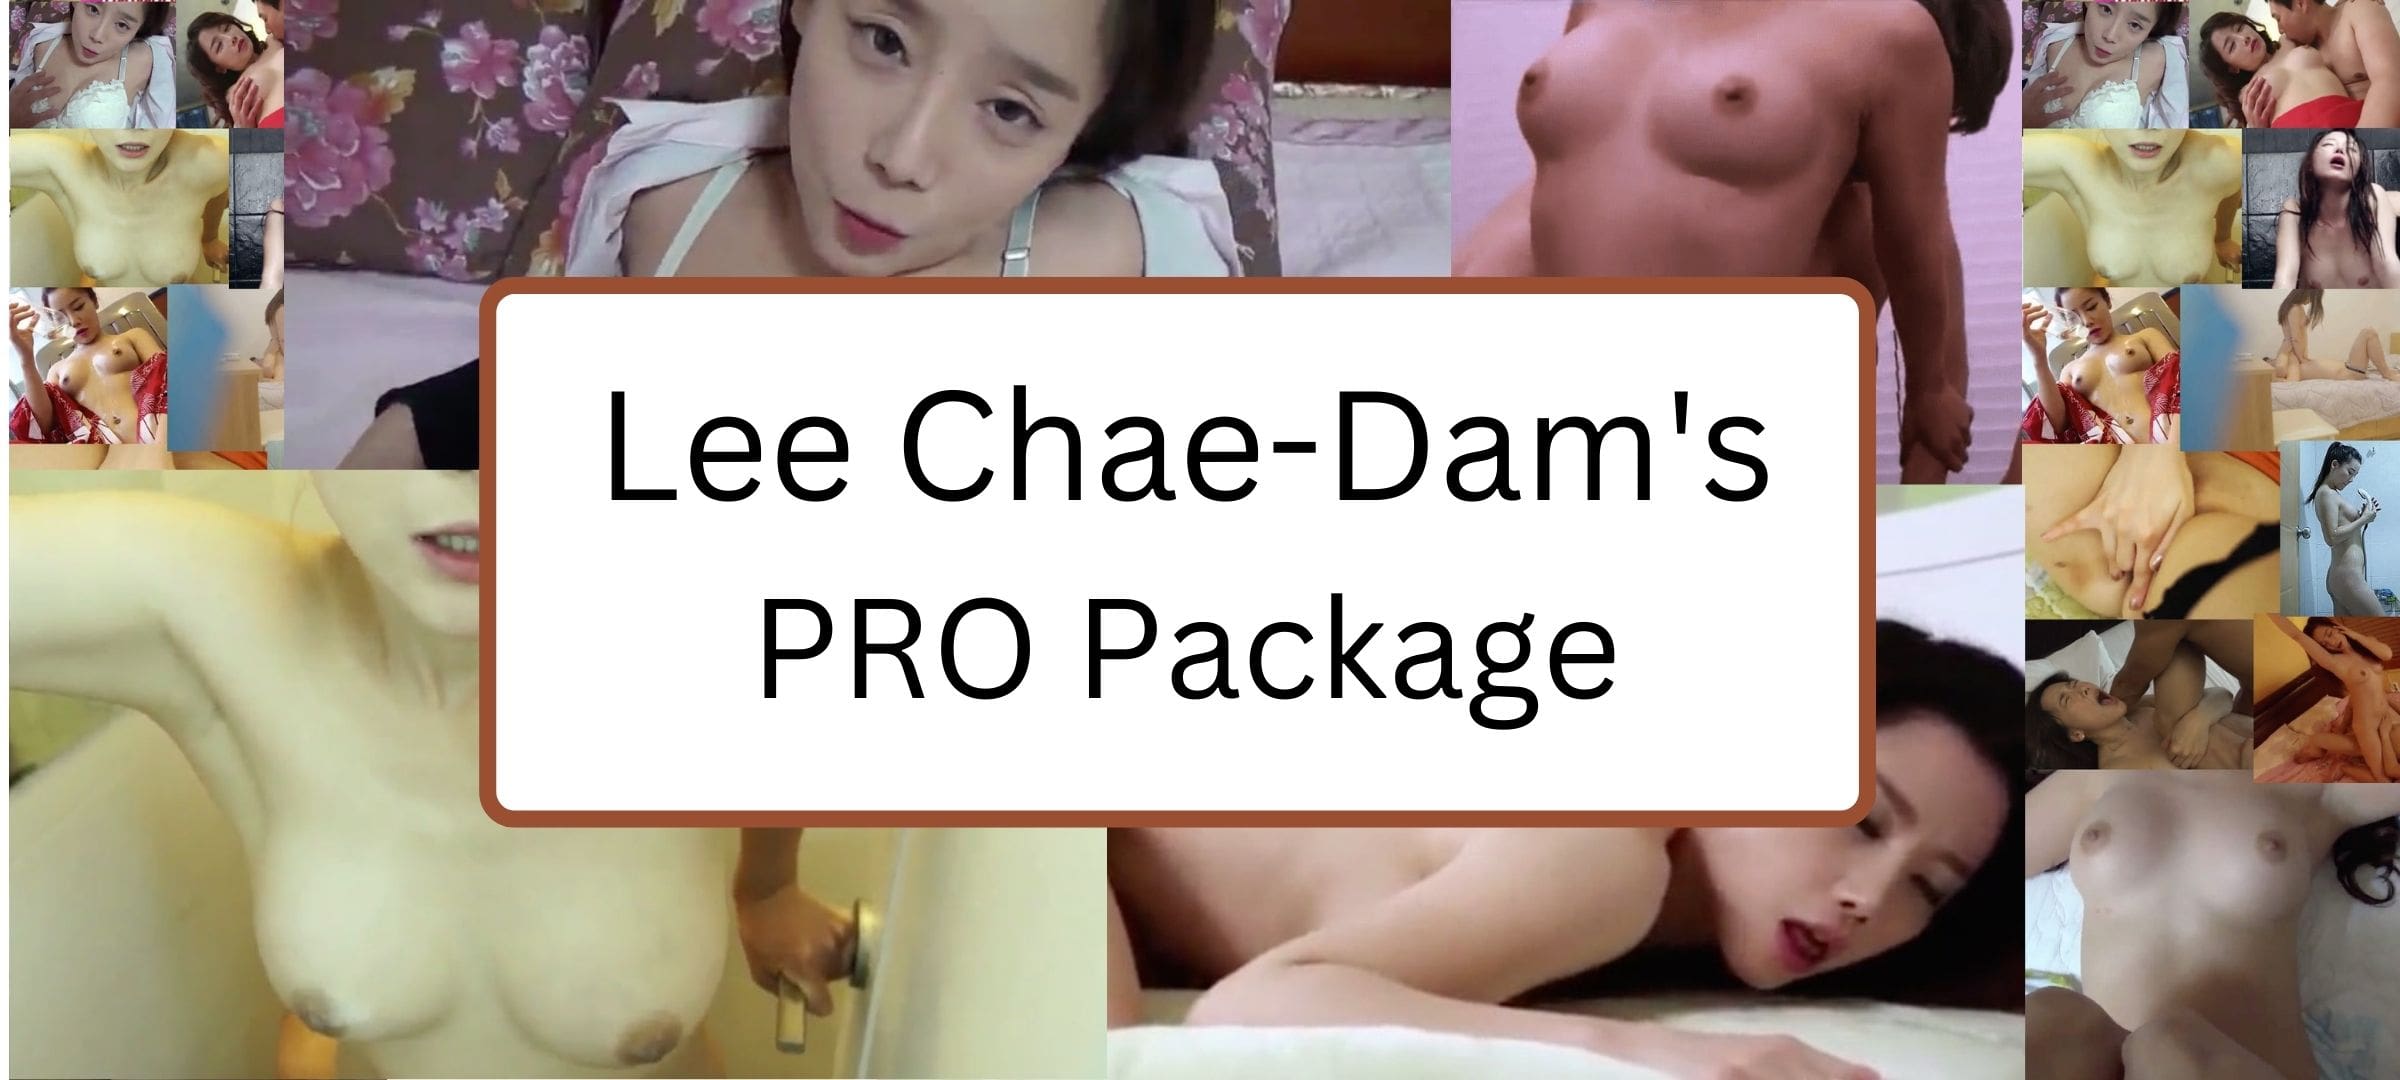 picture of Lee chae dam PRO package banner